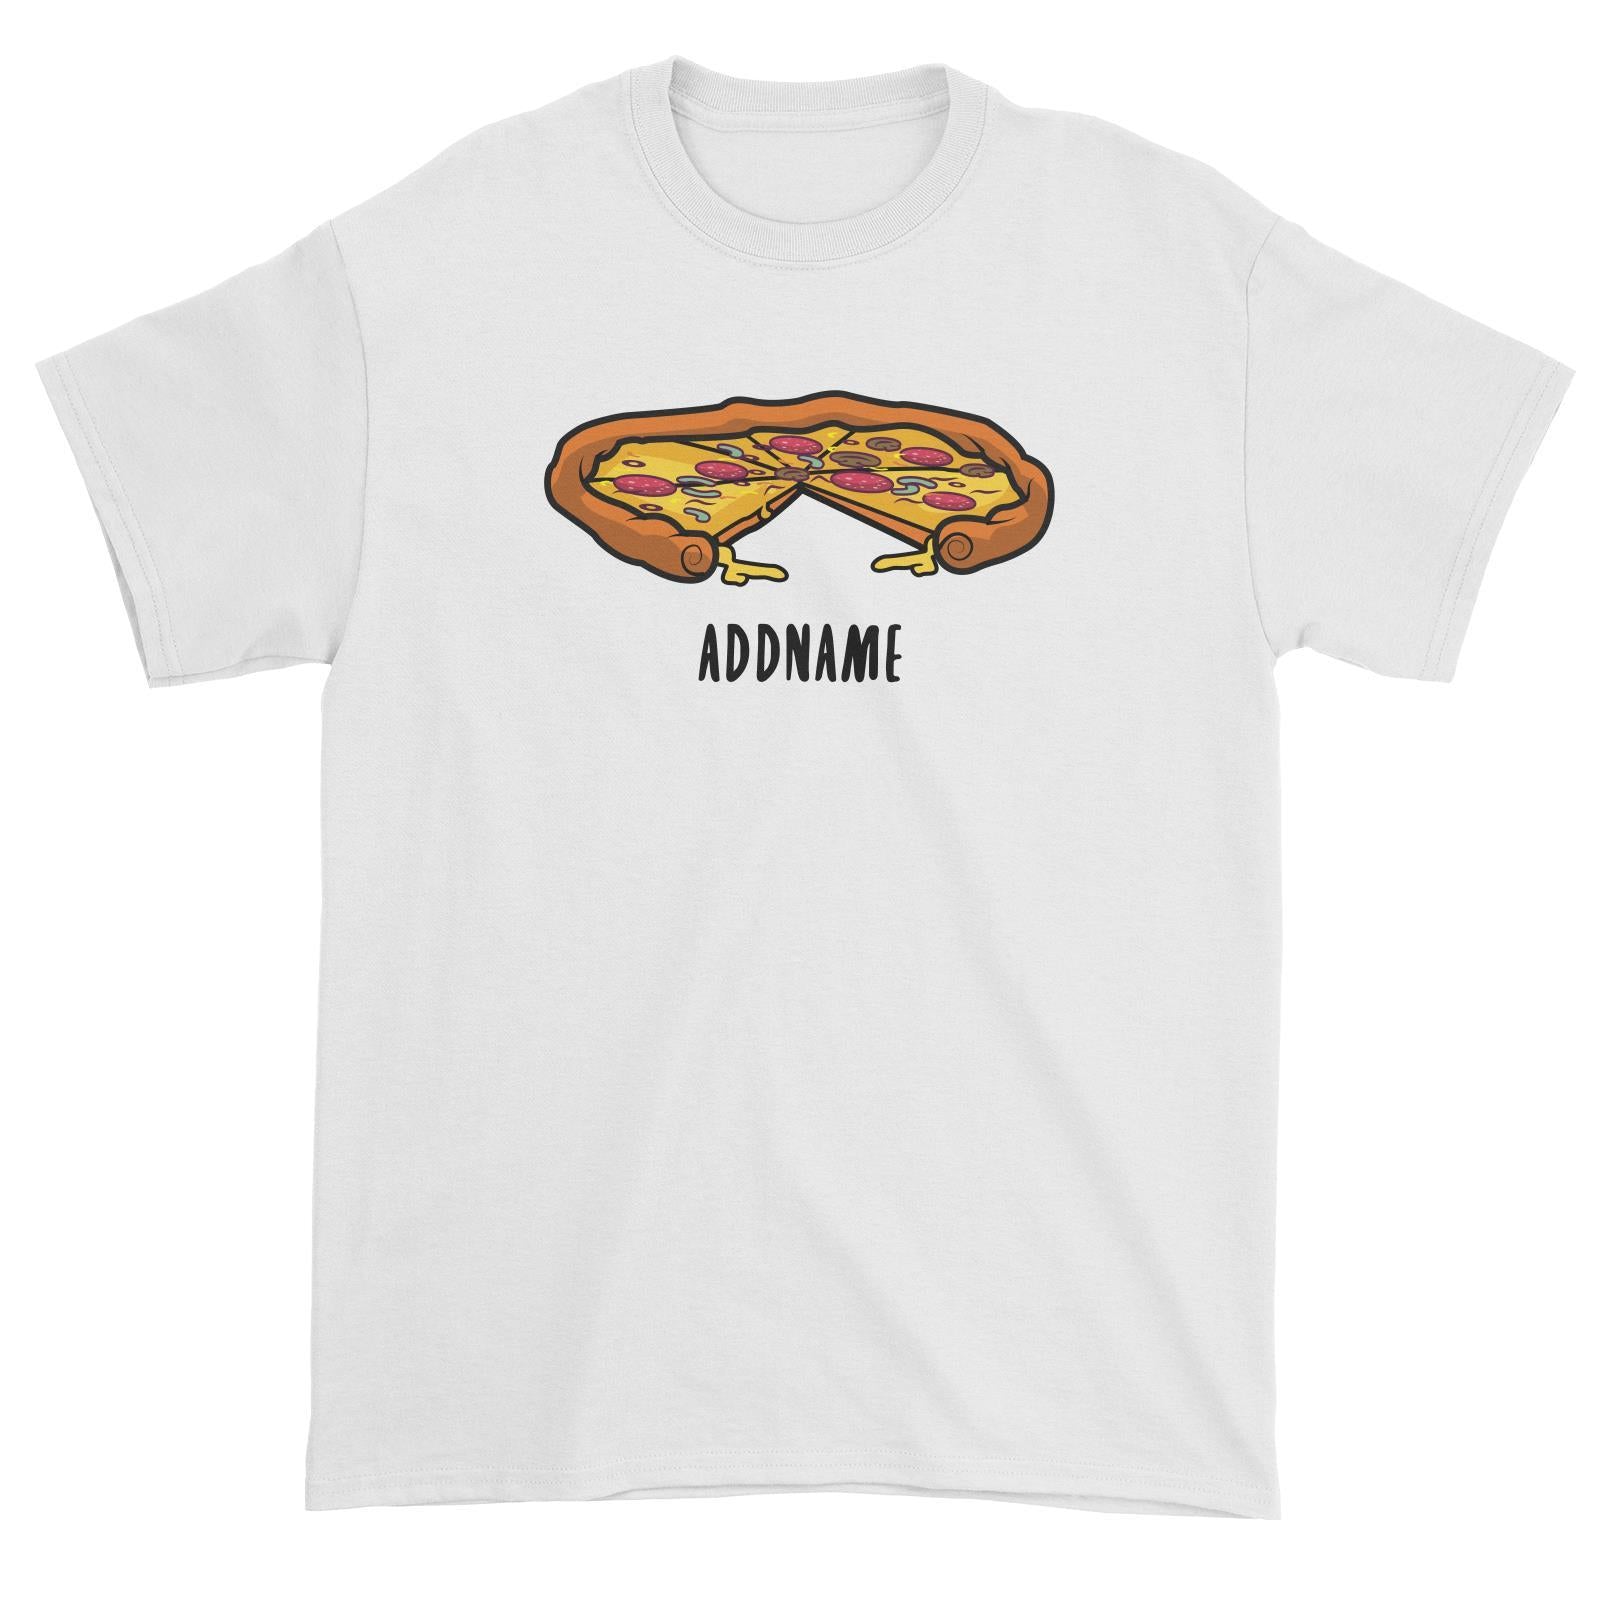 Fast Food Whole Pizza with A Slice Taken Out Addname Unisex T-Shirt  Matching Family Comic Cartoon Personalizable Designs